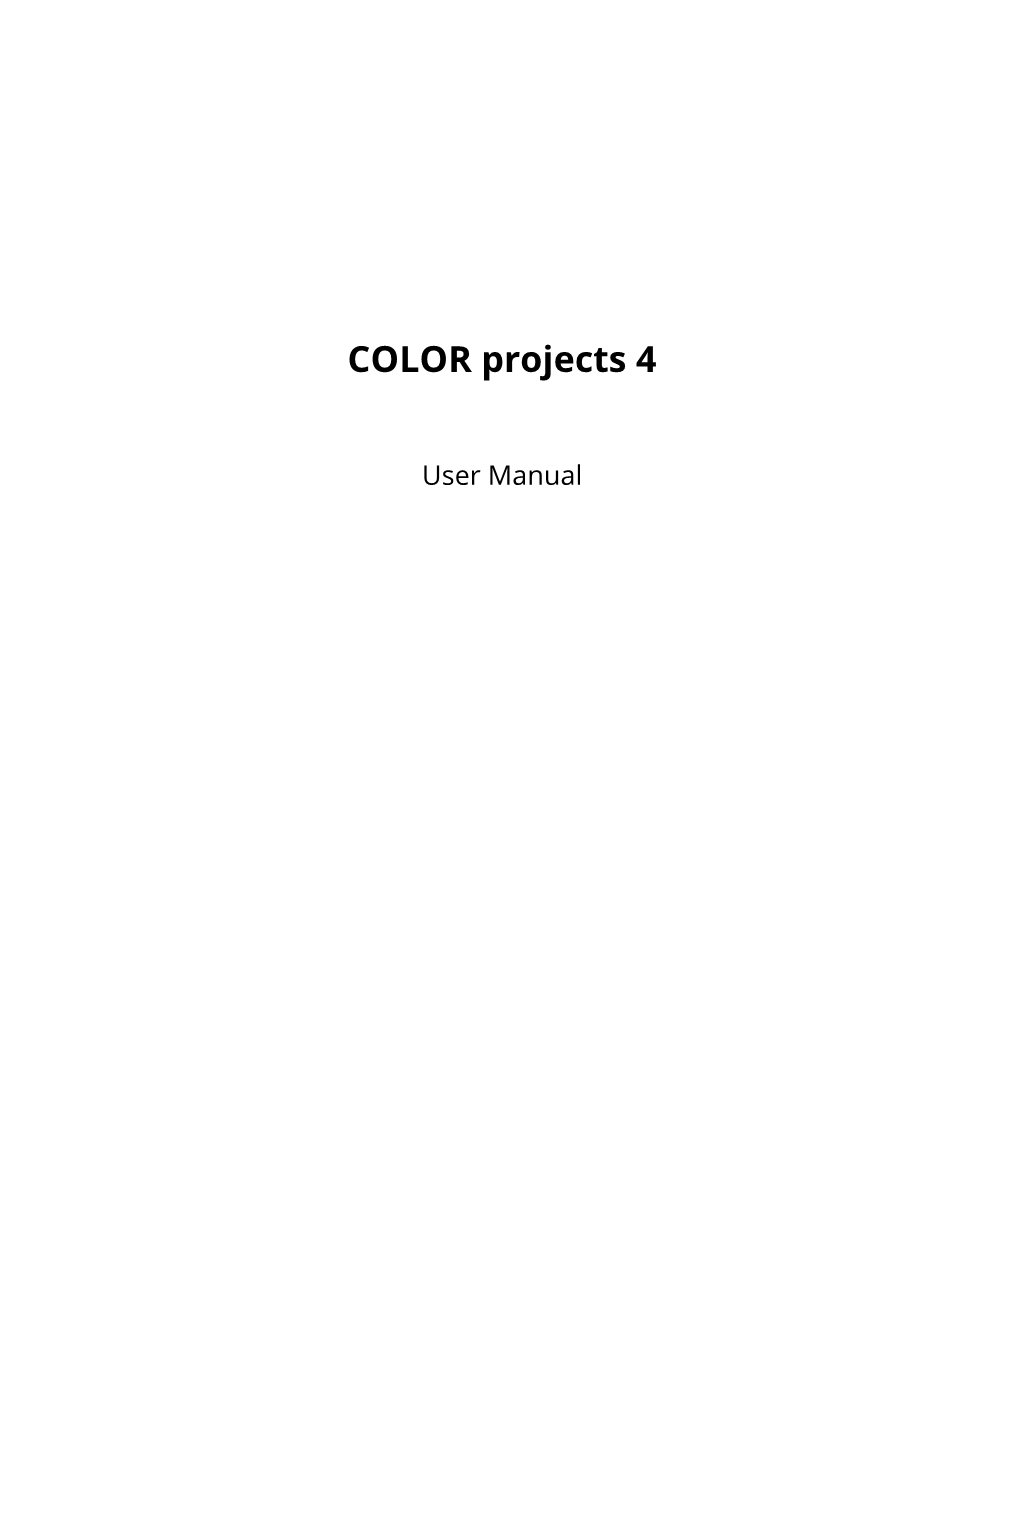 COLOR Projects 4